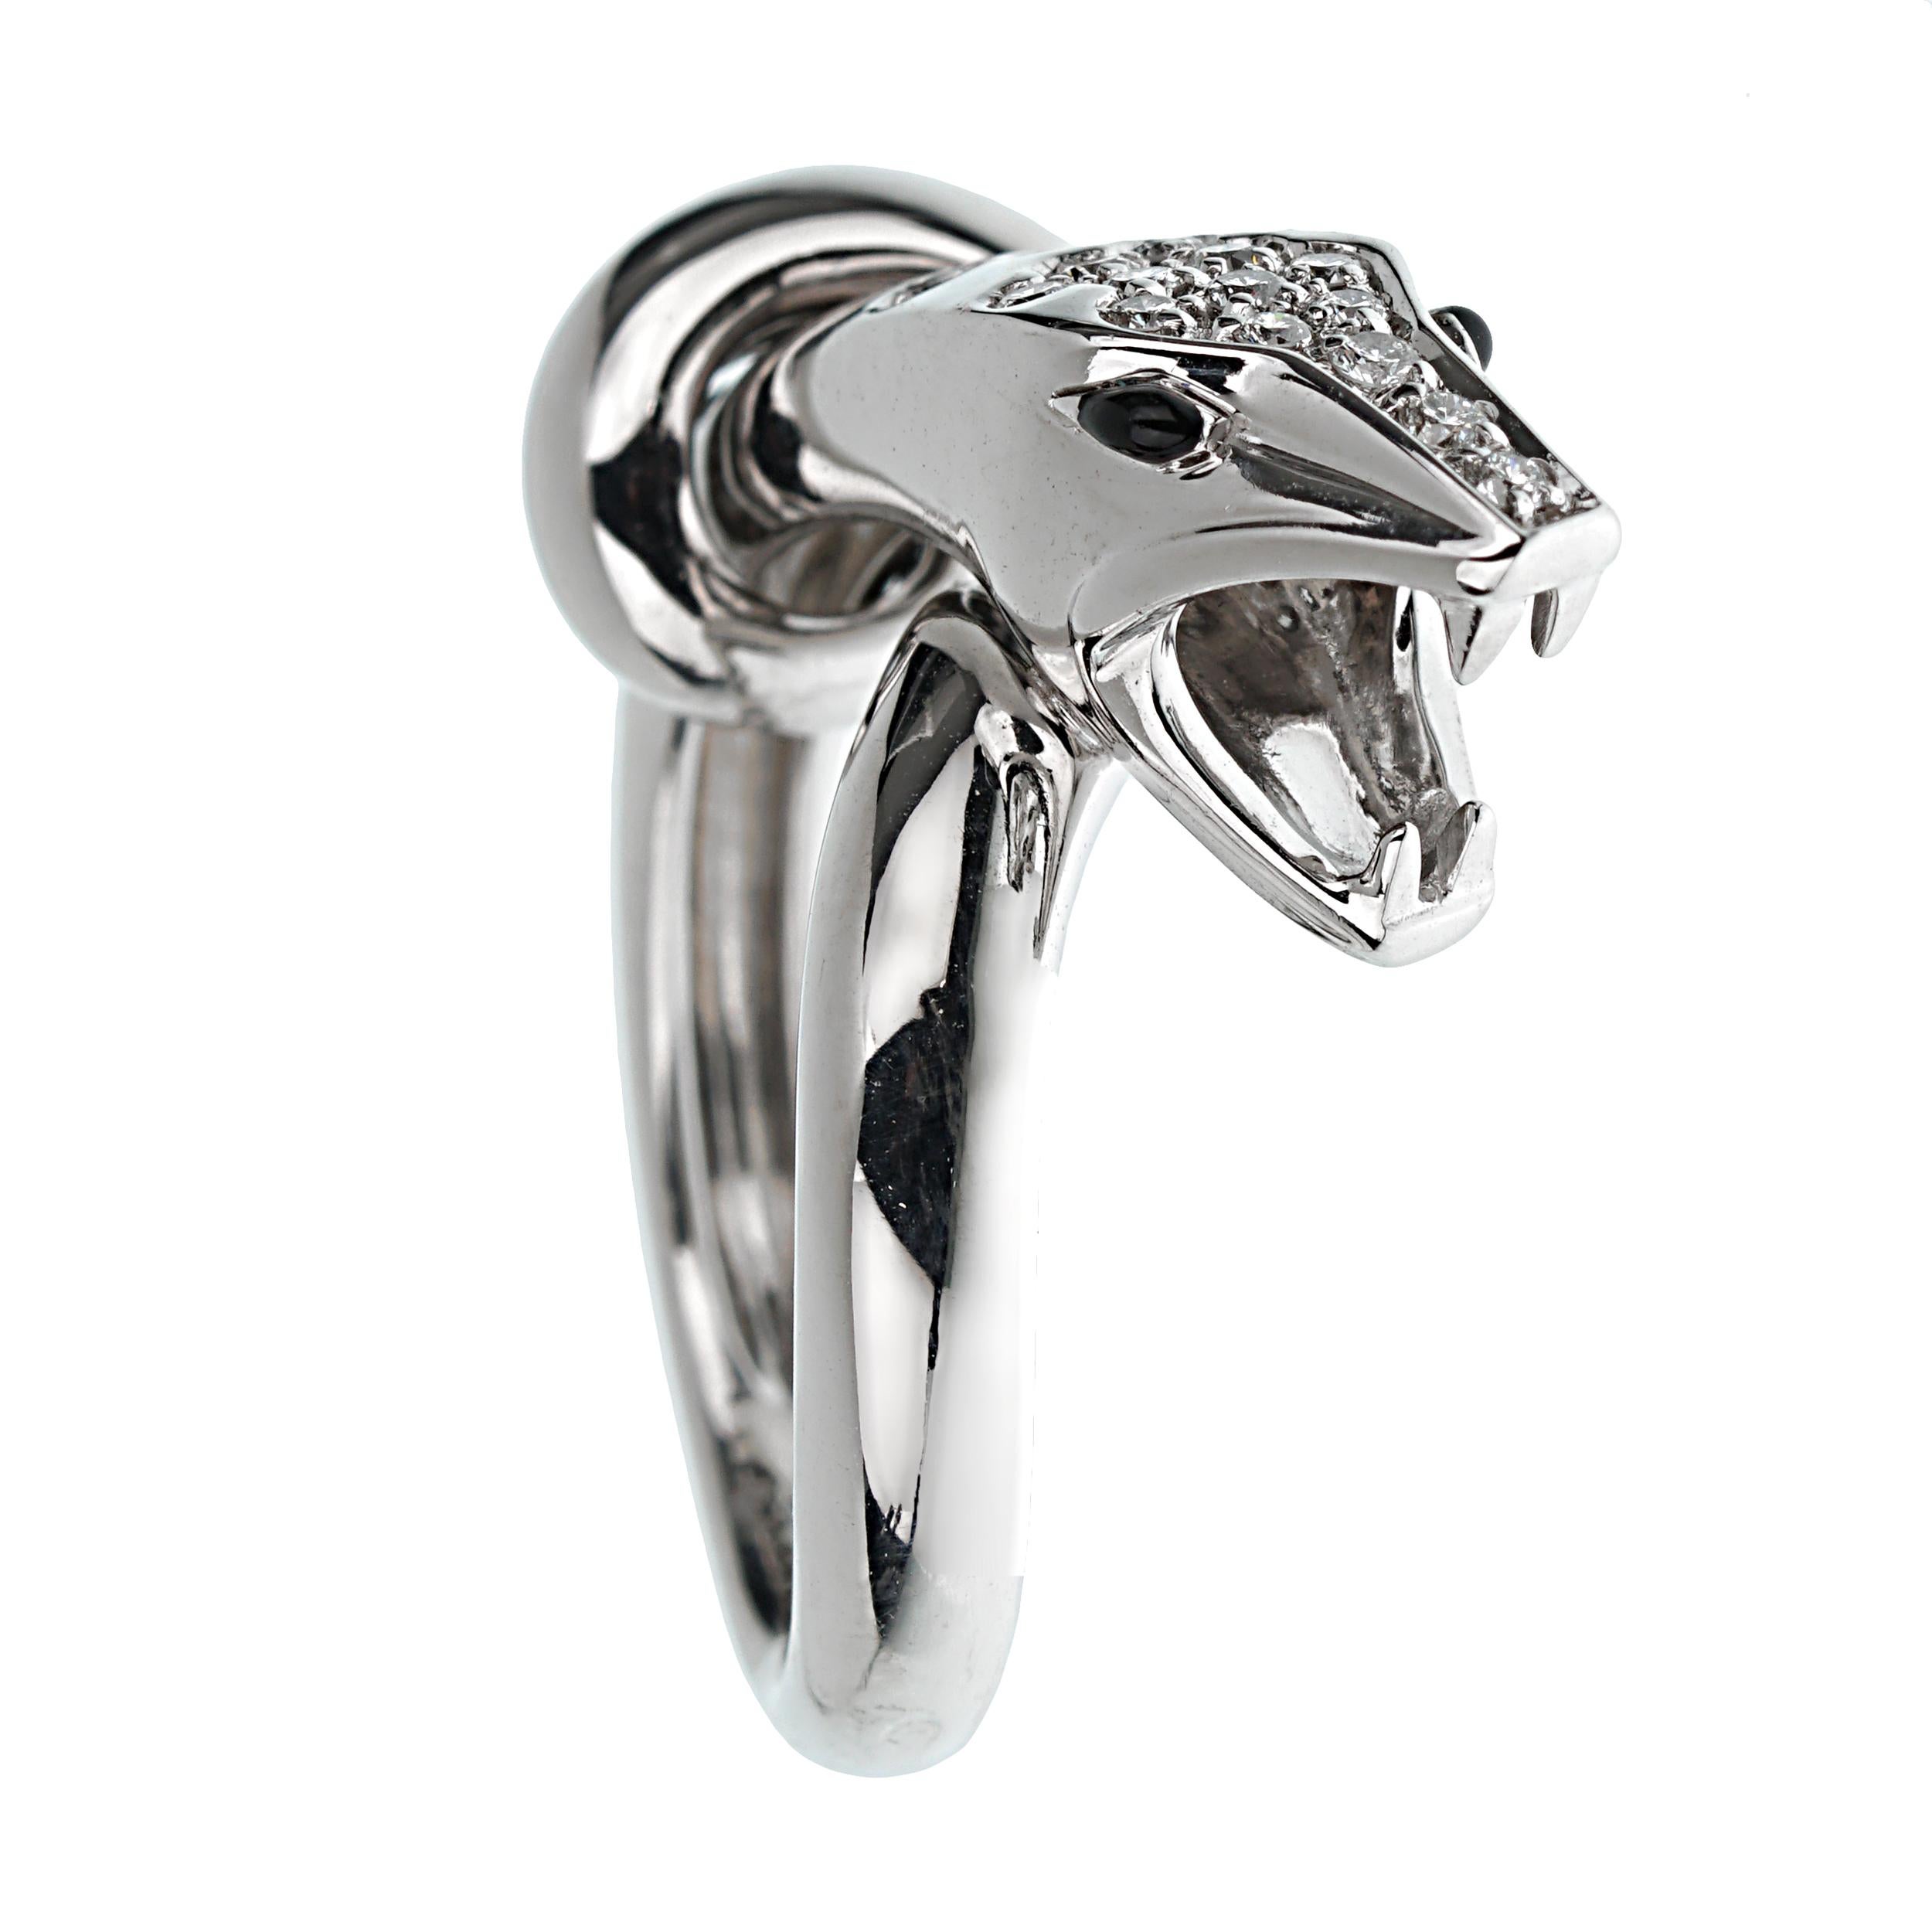 This exquisite Boucheron ring is a stunning representation of the brand's commitment to luxurious and innovative jewelry design. Crafted from 18k white gold, this ring showcases a striking snake motif, embodying both elegance and a touch of